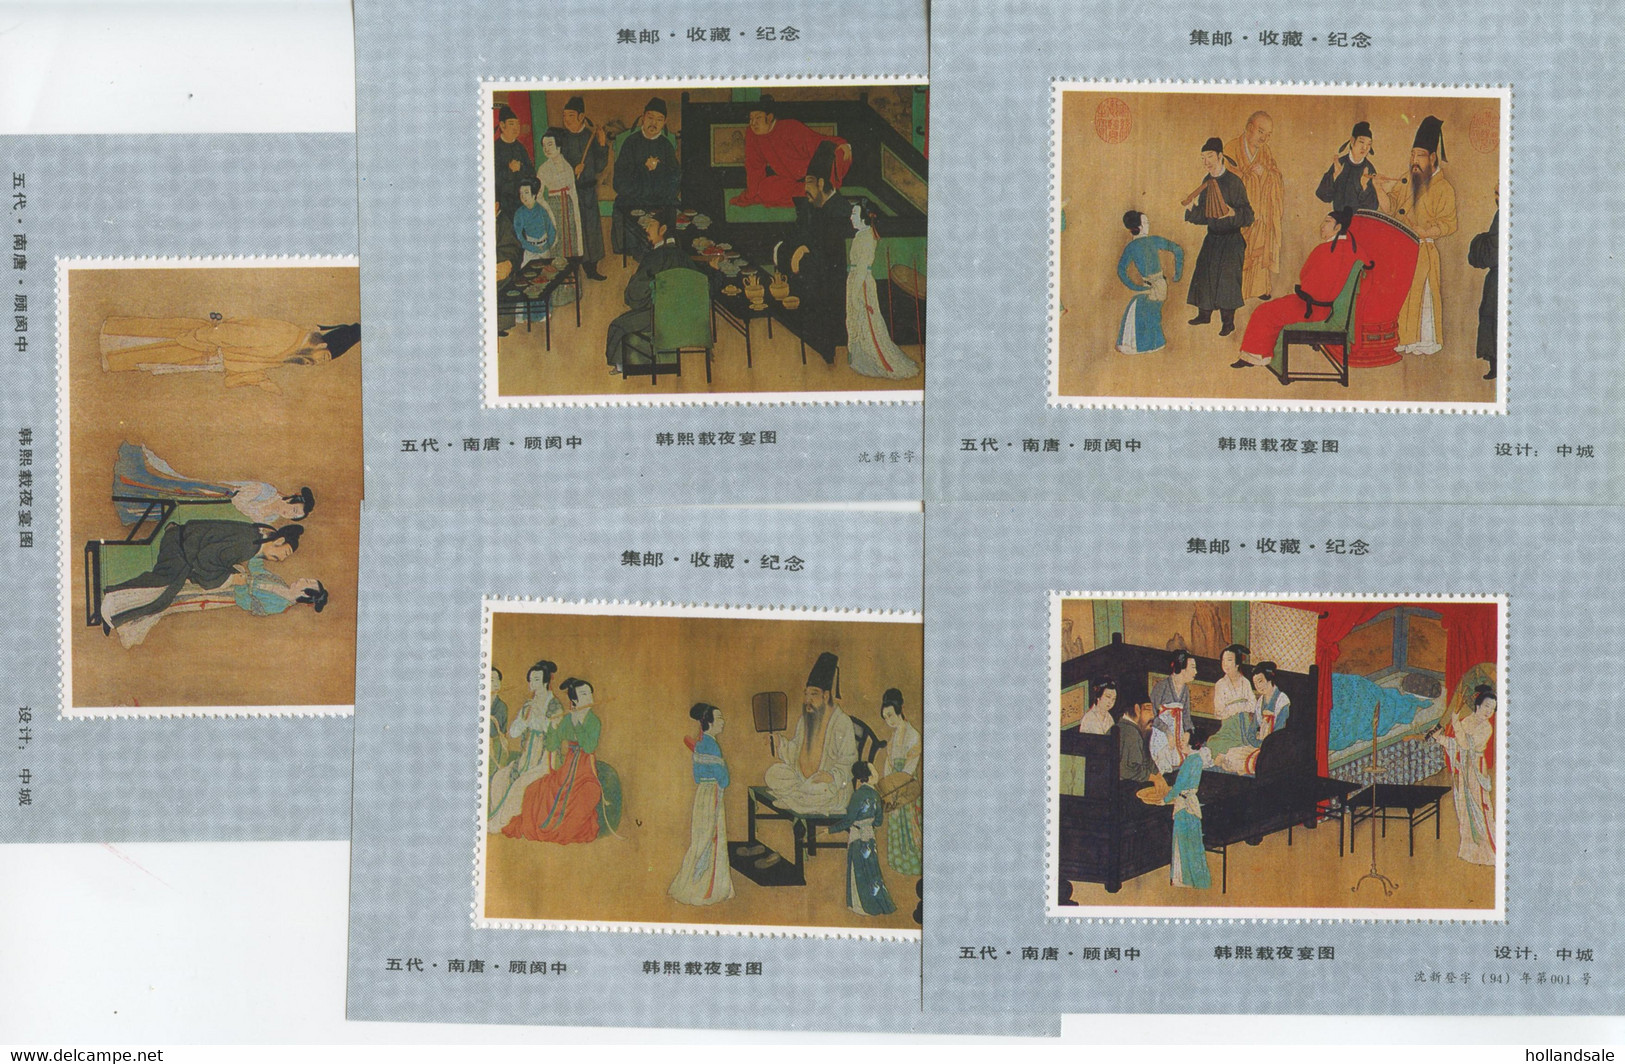 CHINA PRC - Five (5) Sheets. D&O #2512-01/2512-05 - Collections, Lots & Séries